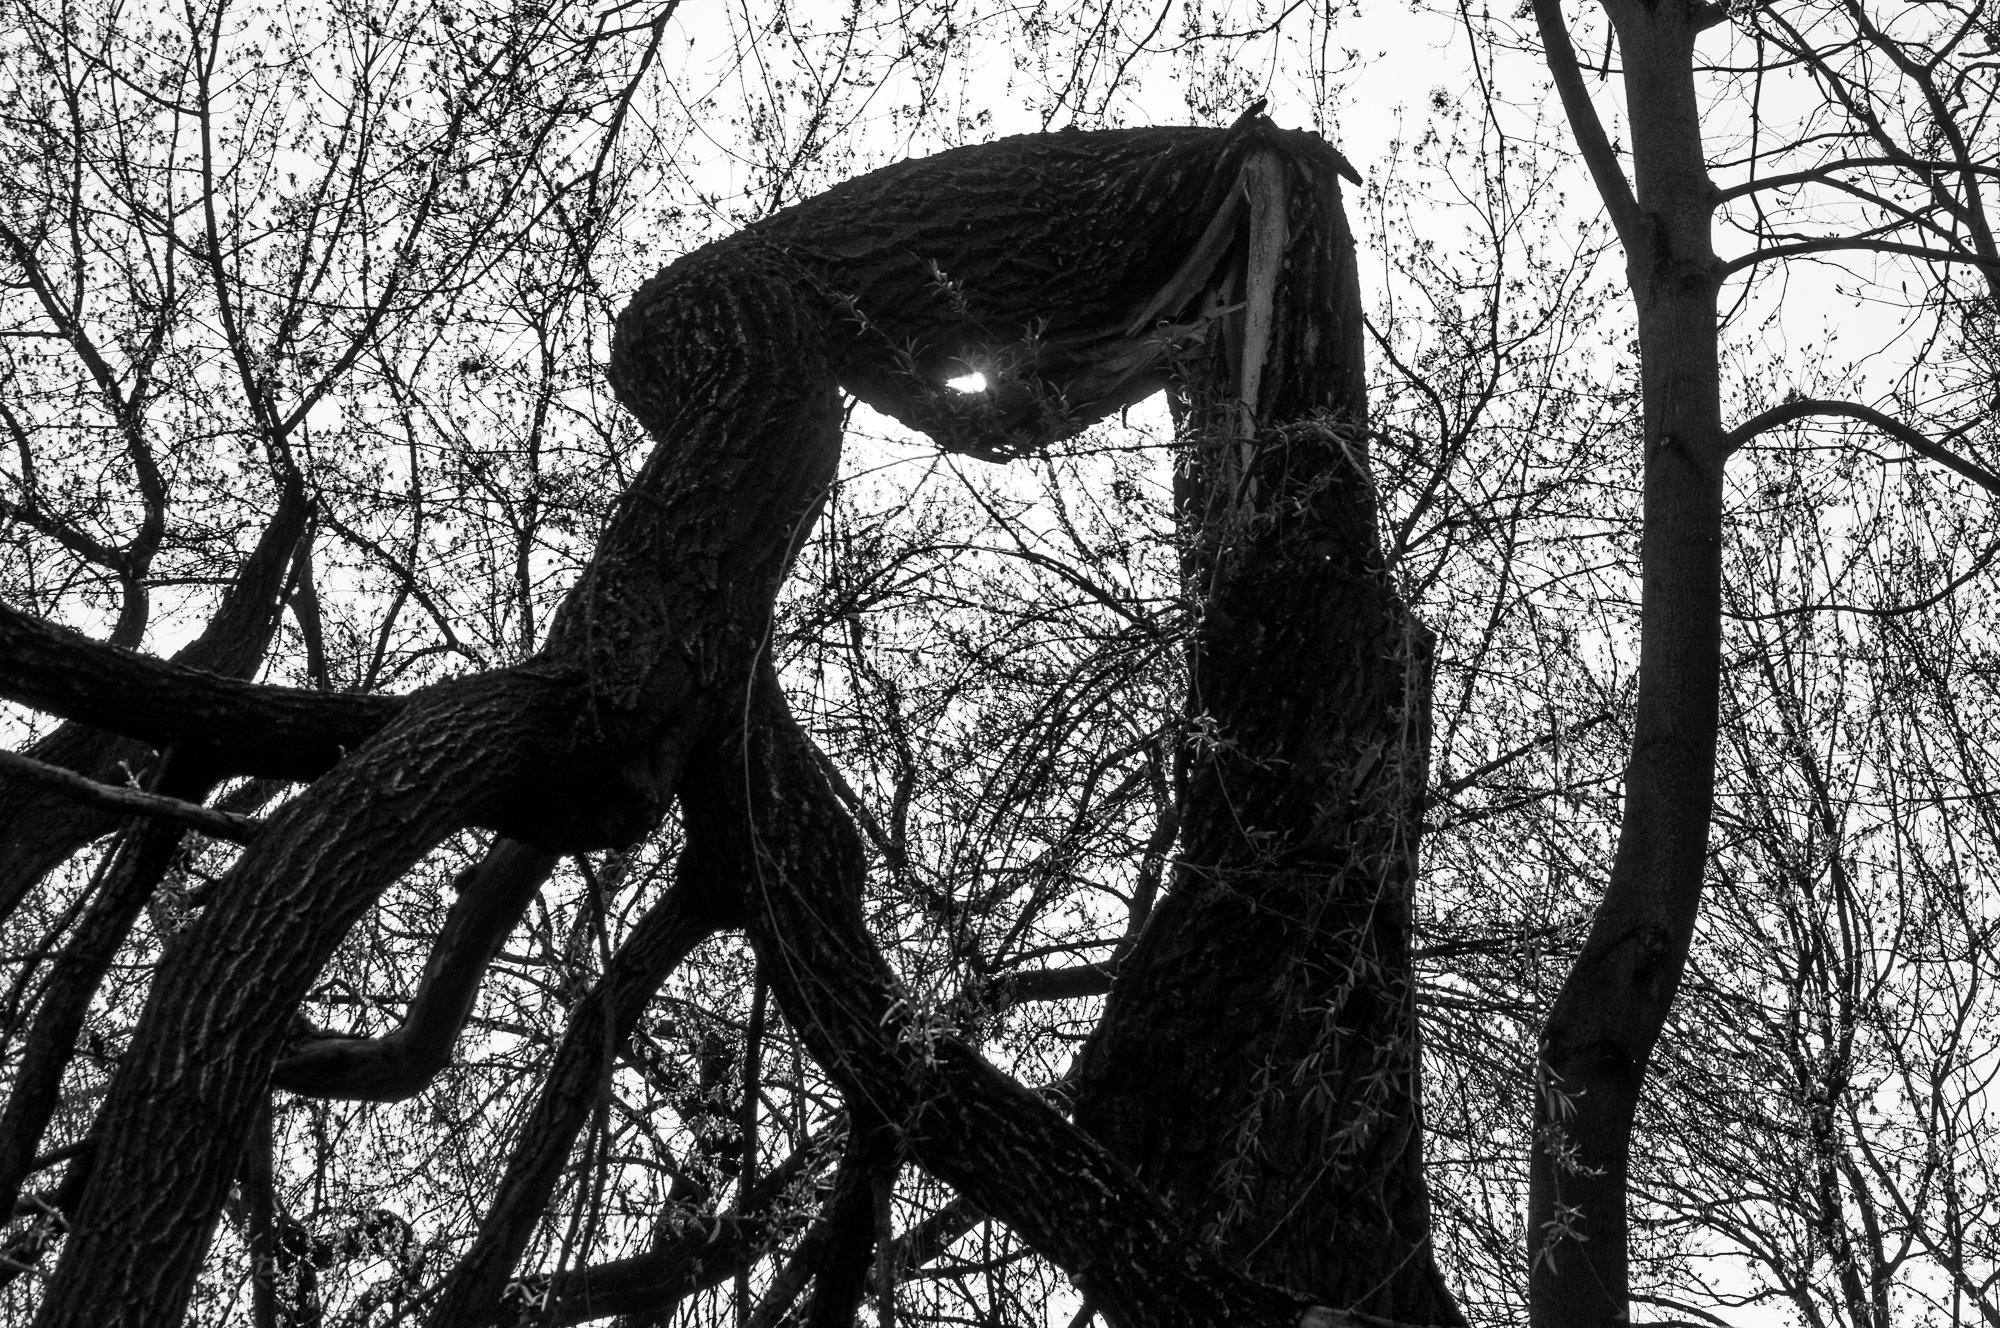 Adam Mazek Photography Warsaw 2021. Post: "The first man-made object in space." Abstraction. Creepy tree.